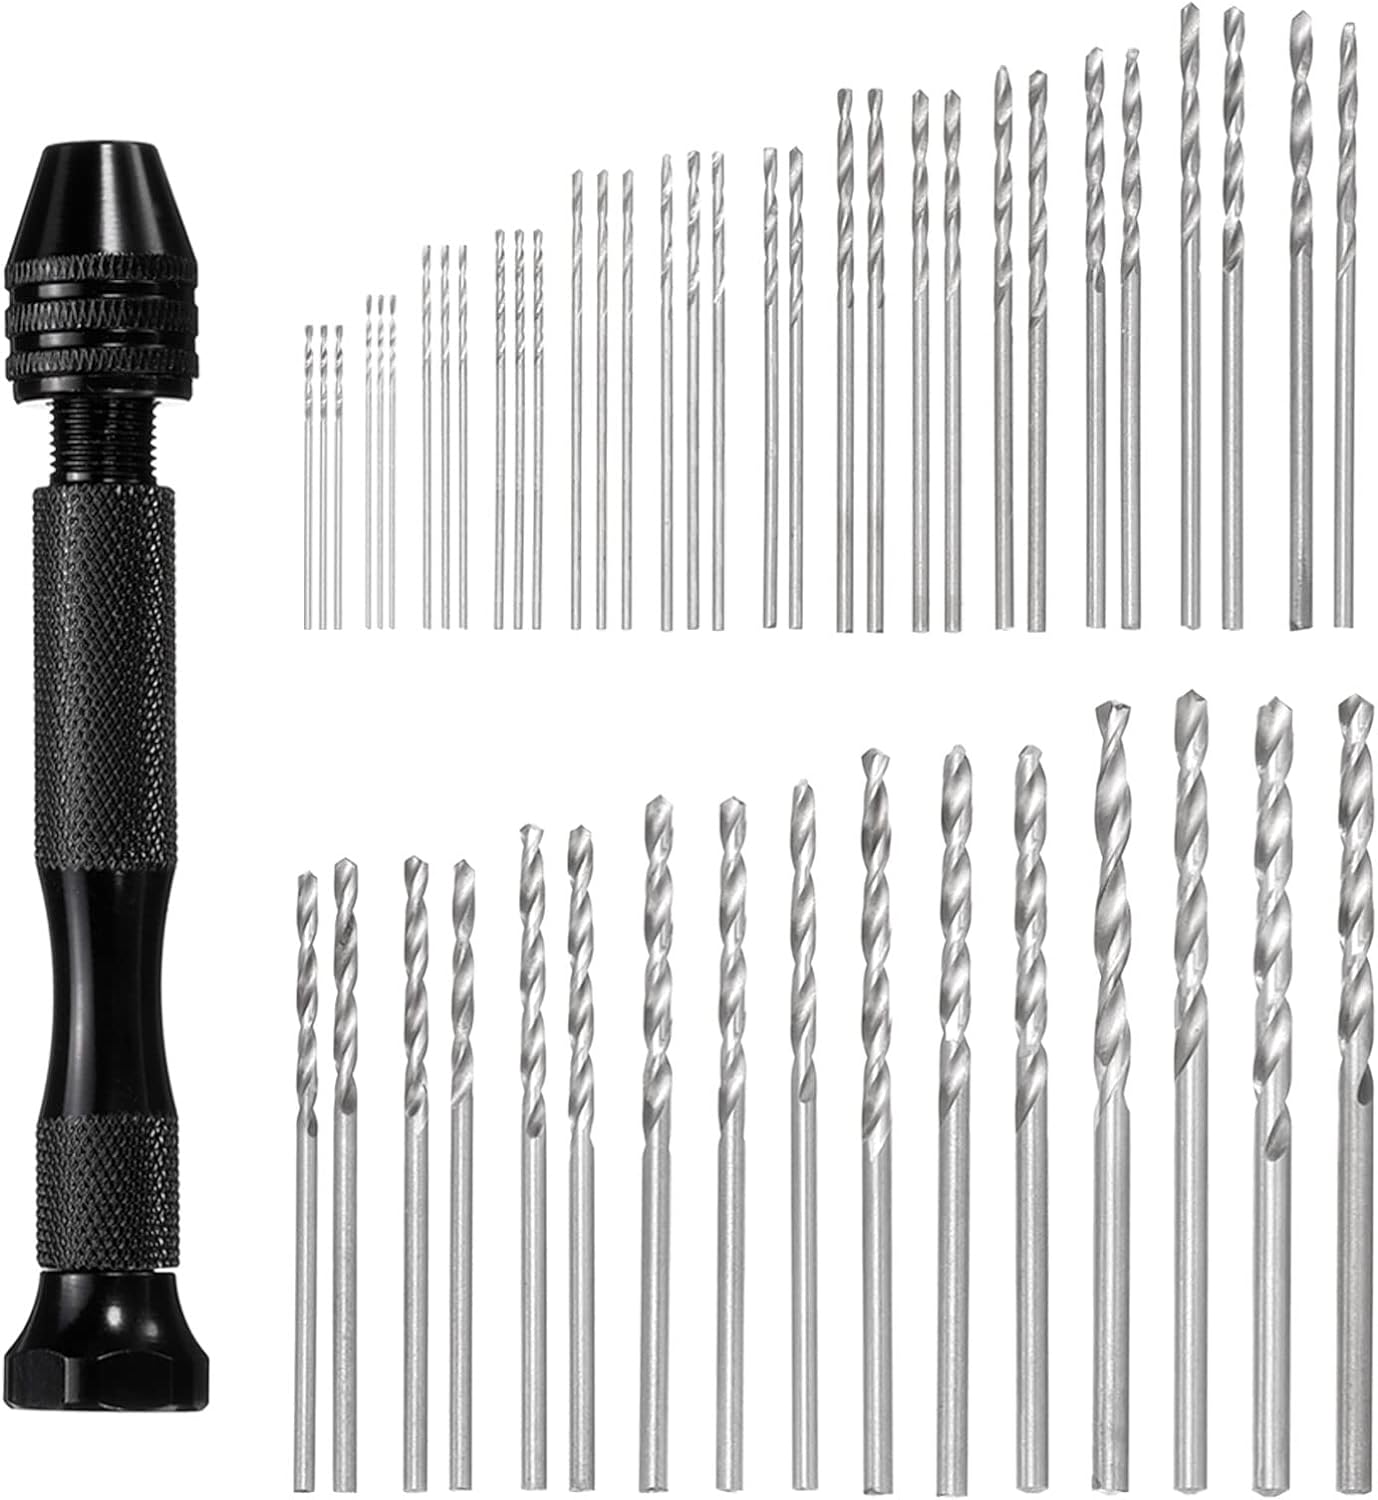 UXCELL 49pcs Pin Vise Drill Bit Set, 0.5mm-3.0mm Micro Mini Twist Drill Bits Set 48pcs, Precision Pin Vise Rotary Hand Tools, for Meta